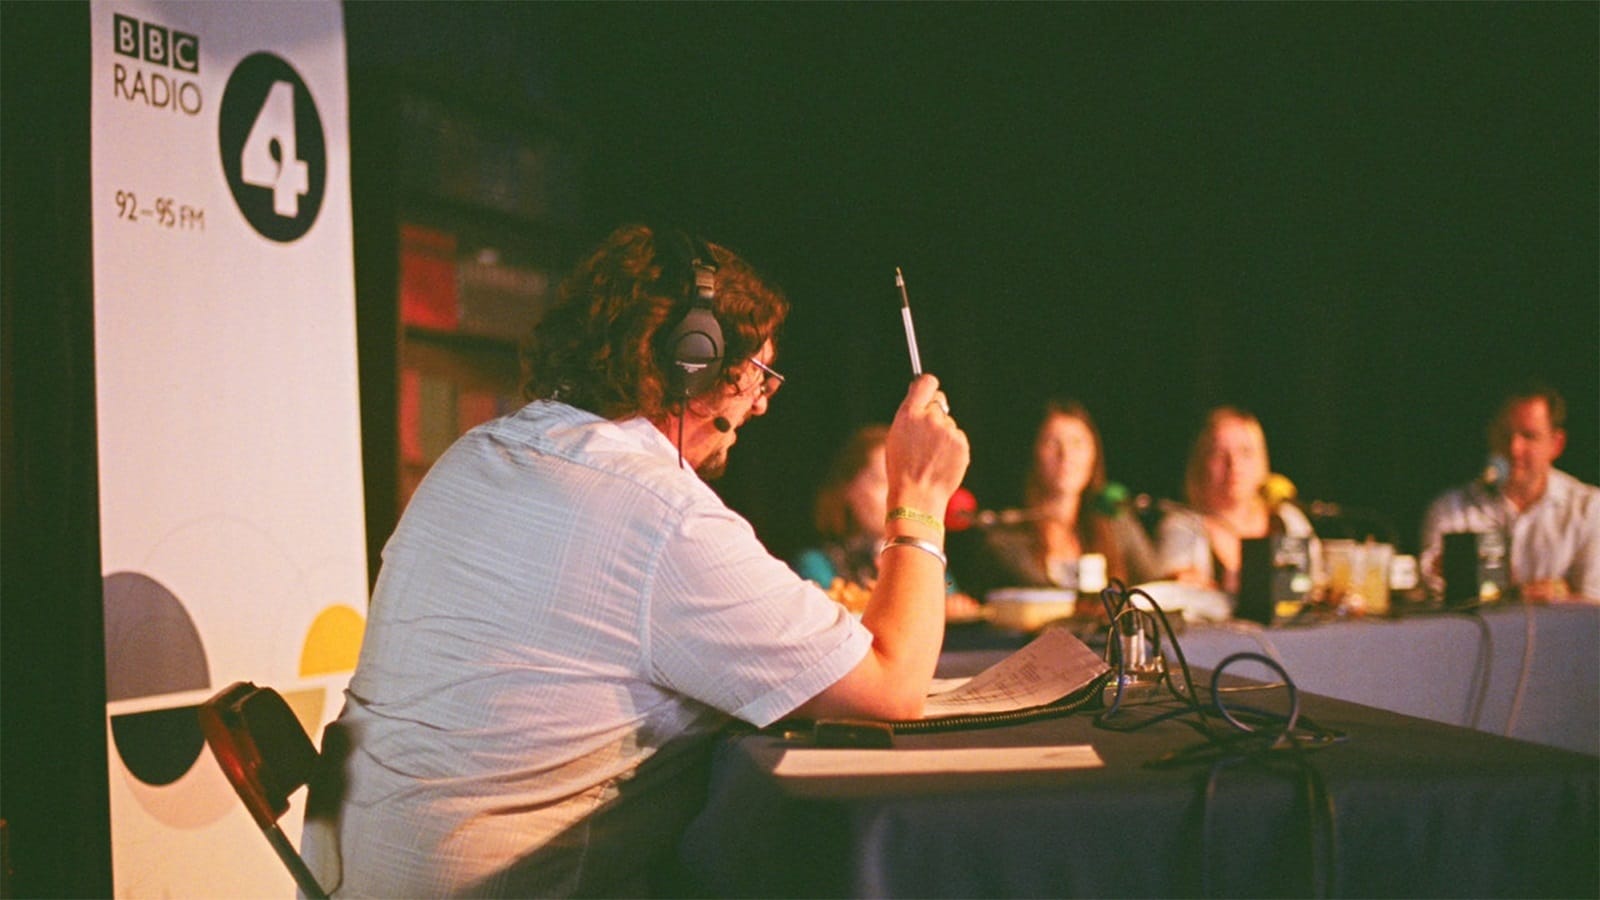 A man wearing headphones talks to a panel of people